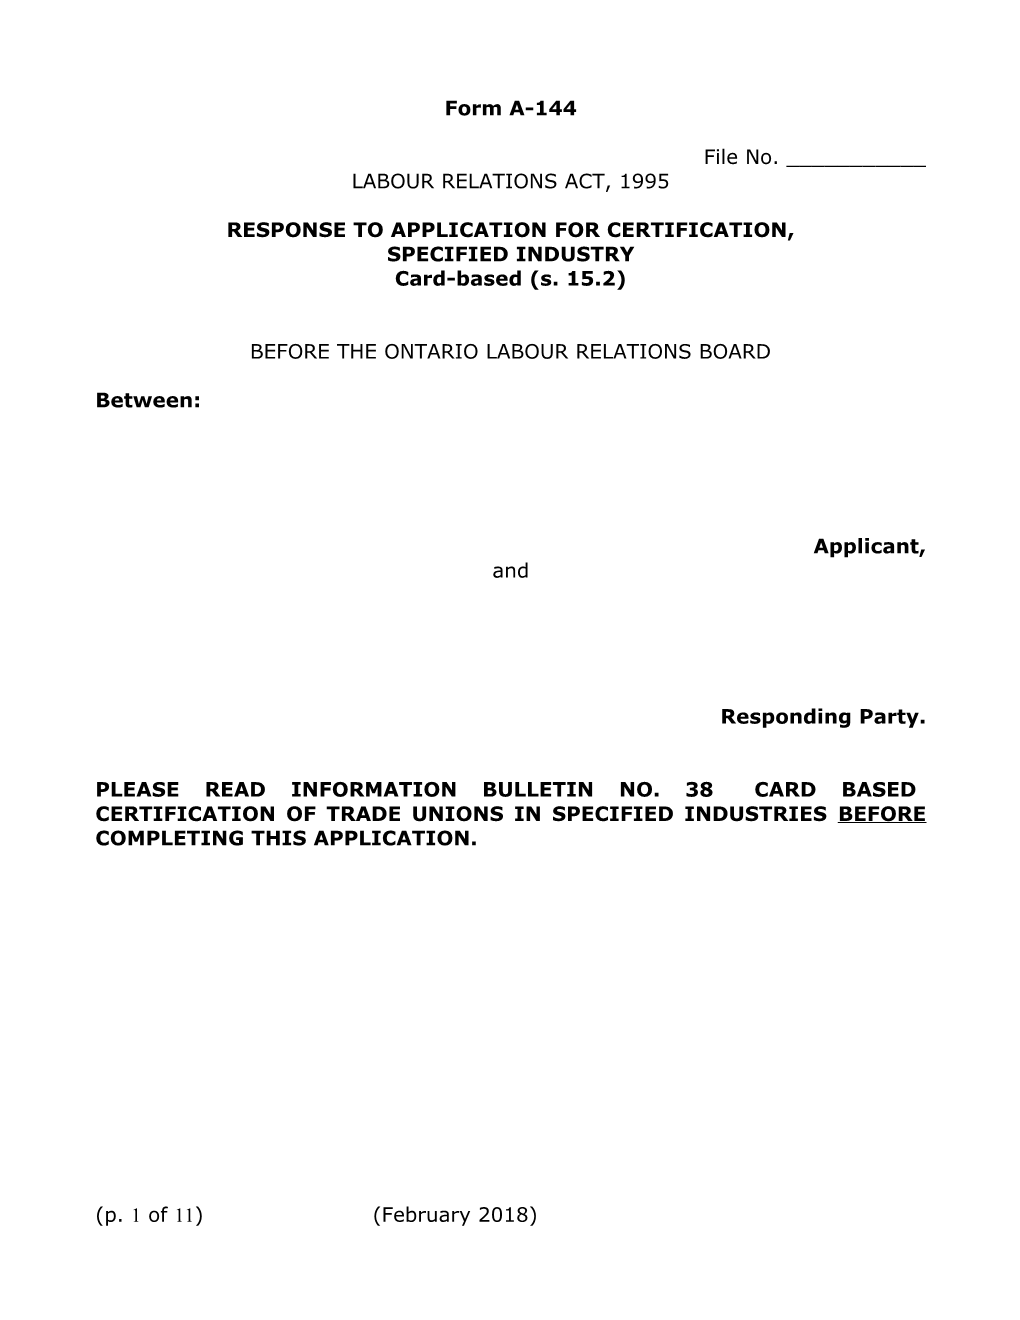 Response to Application for Certification, Construction Industry